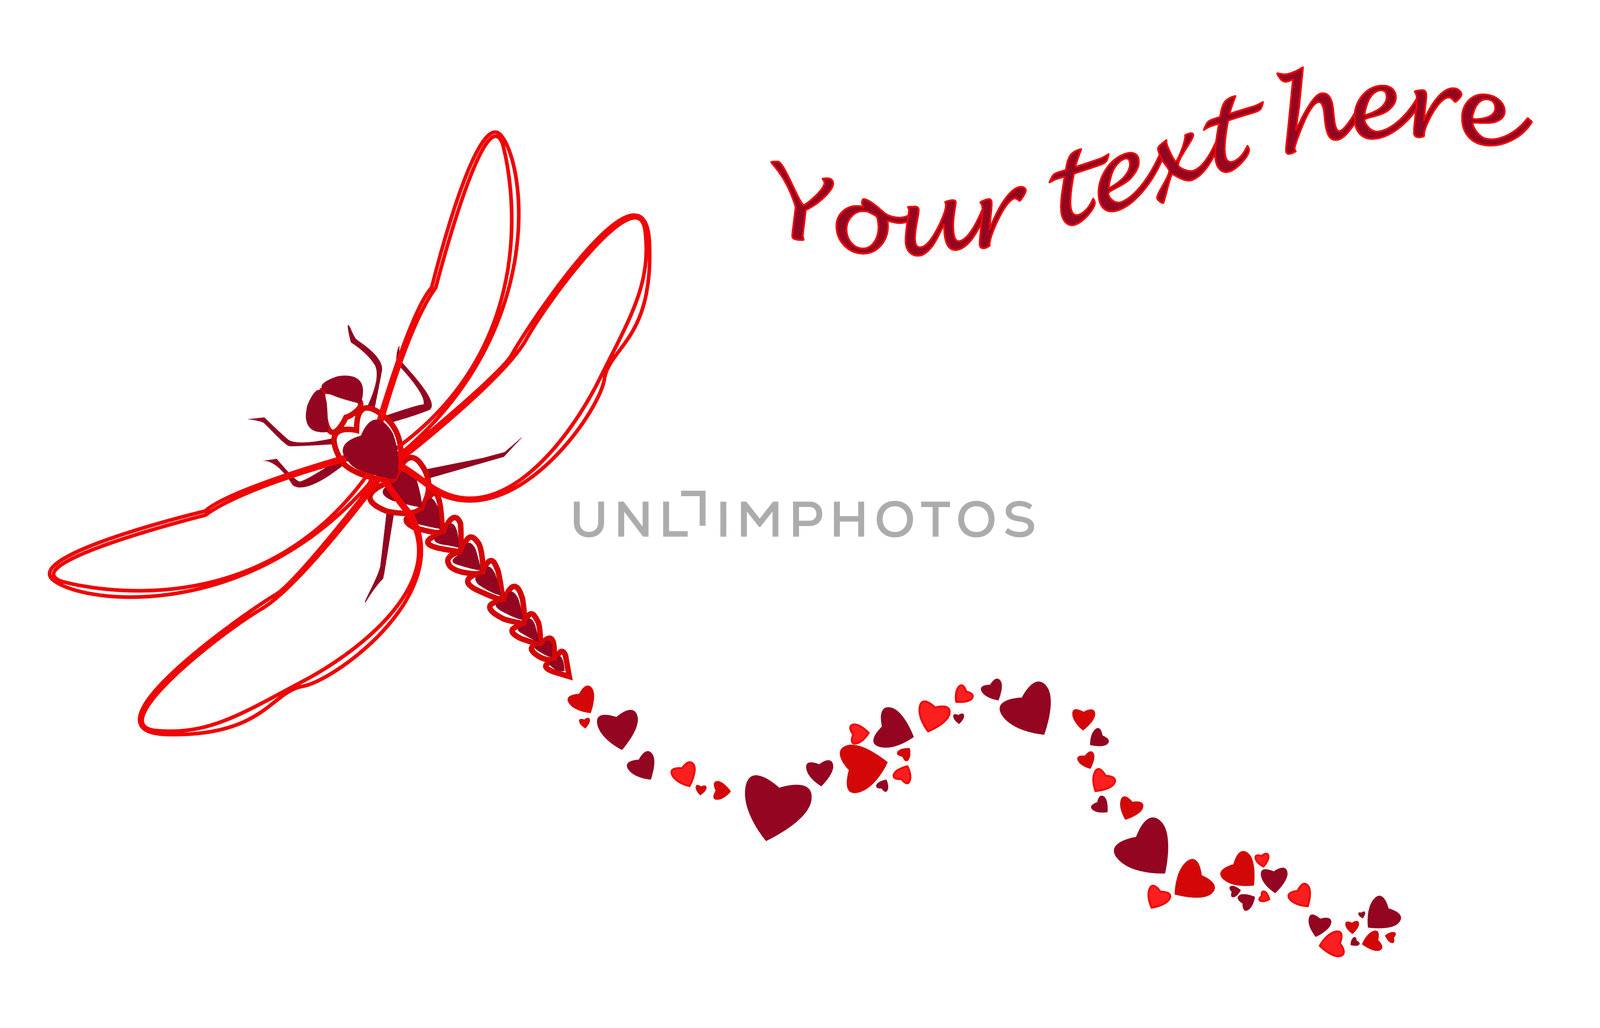 Large cute and original dragronfly made of heat shapes and leaving hearts along its fly path, perfect for wedding invitation or Valentine's day card.